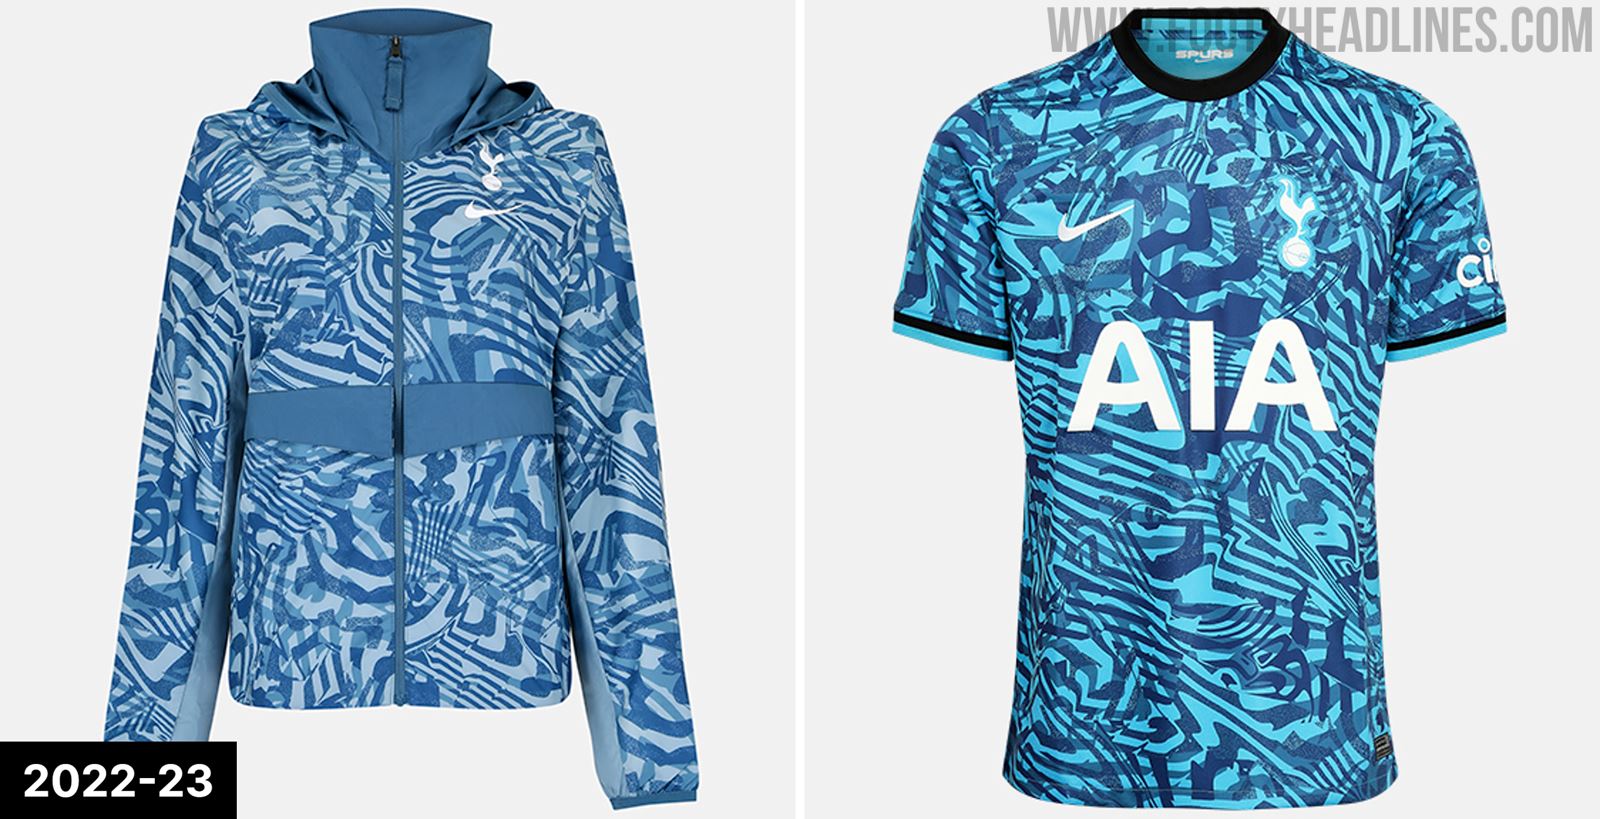 The new 23/24 official Tottenham home kit is officially out and I'm loving  the new name/number groovy Nike font! : r/coys